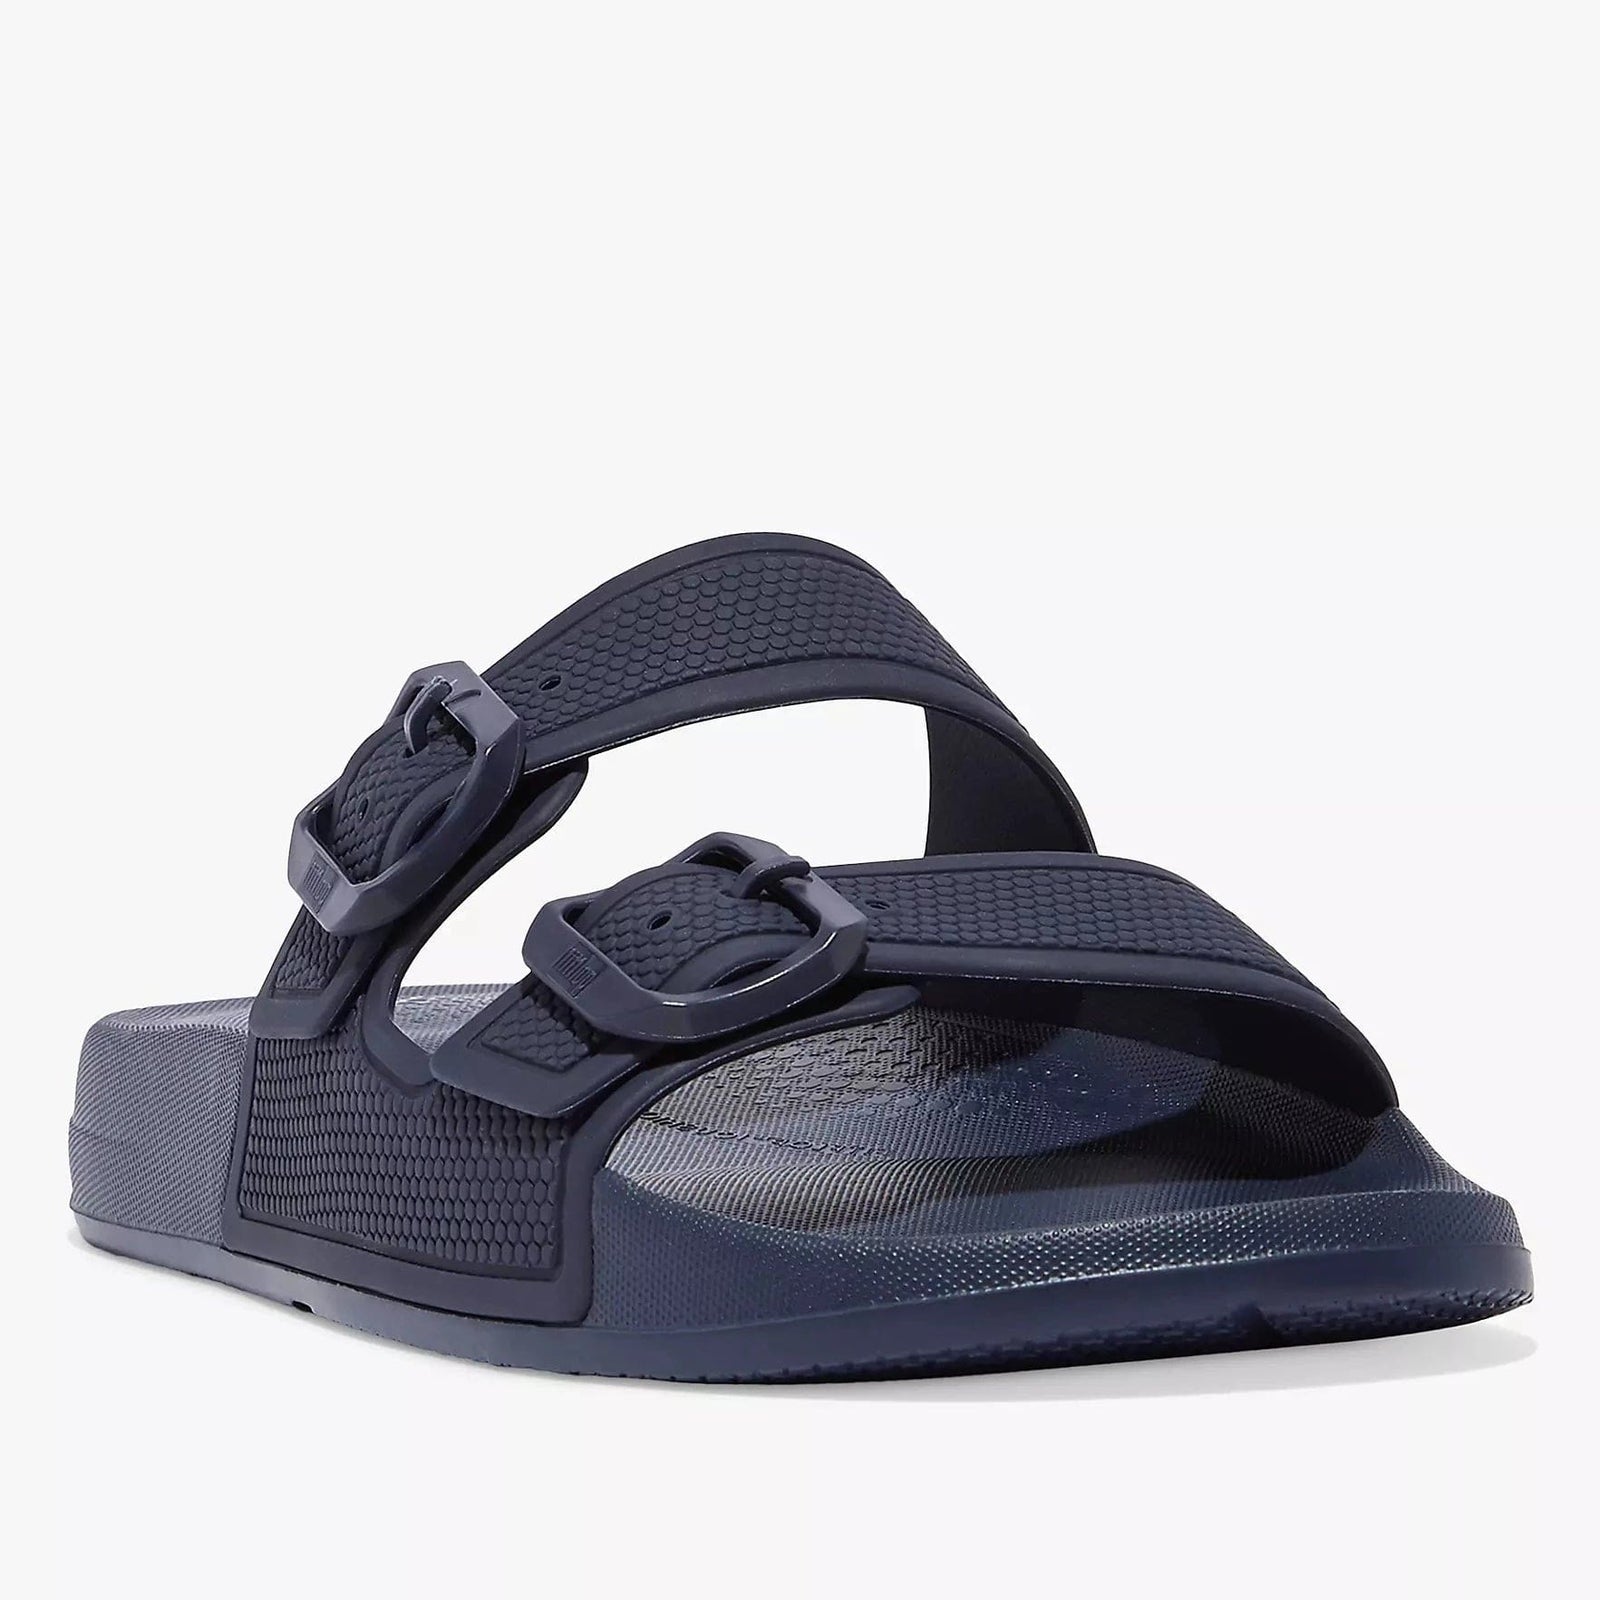 FitFlop IQushion Slider Sandals, Midnight Navy